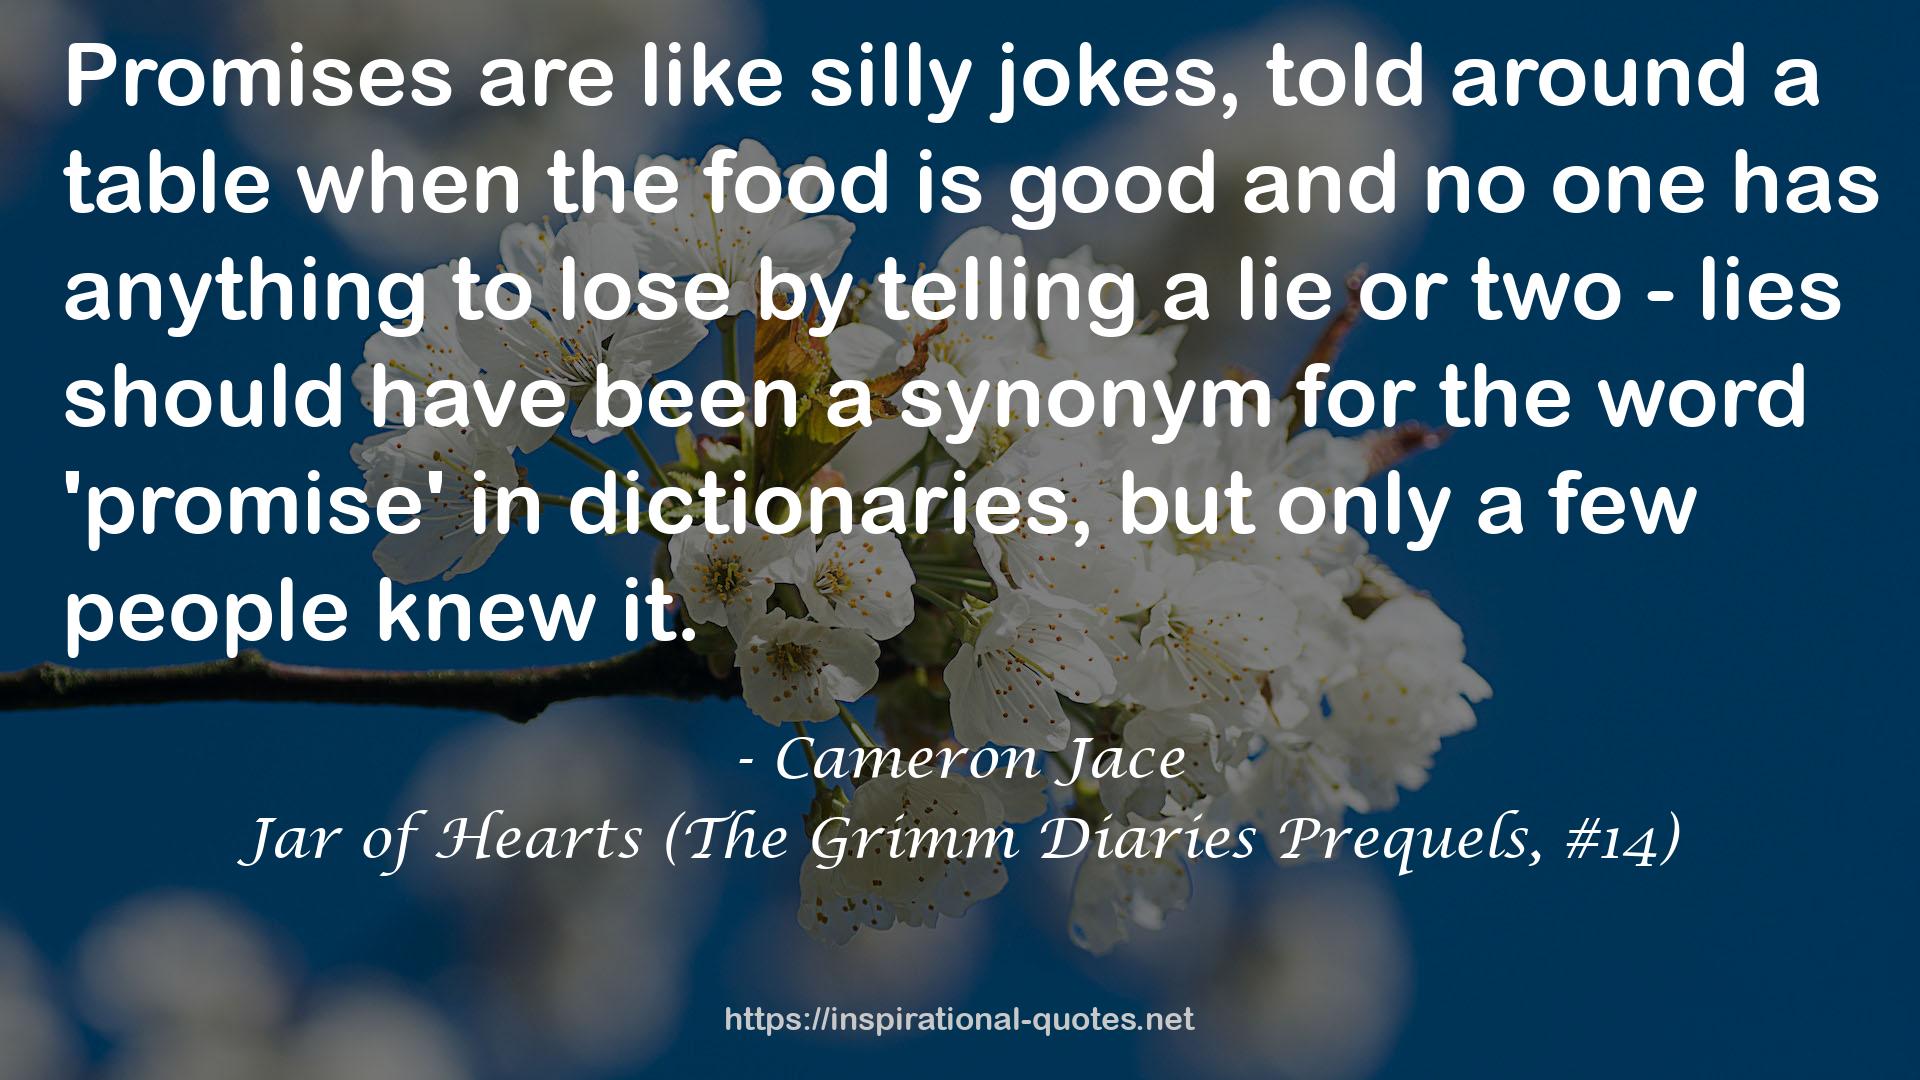 Jar of Hearts (The Grimm Diaries Prequels, #14) QUOTES